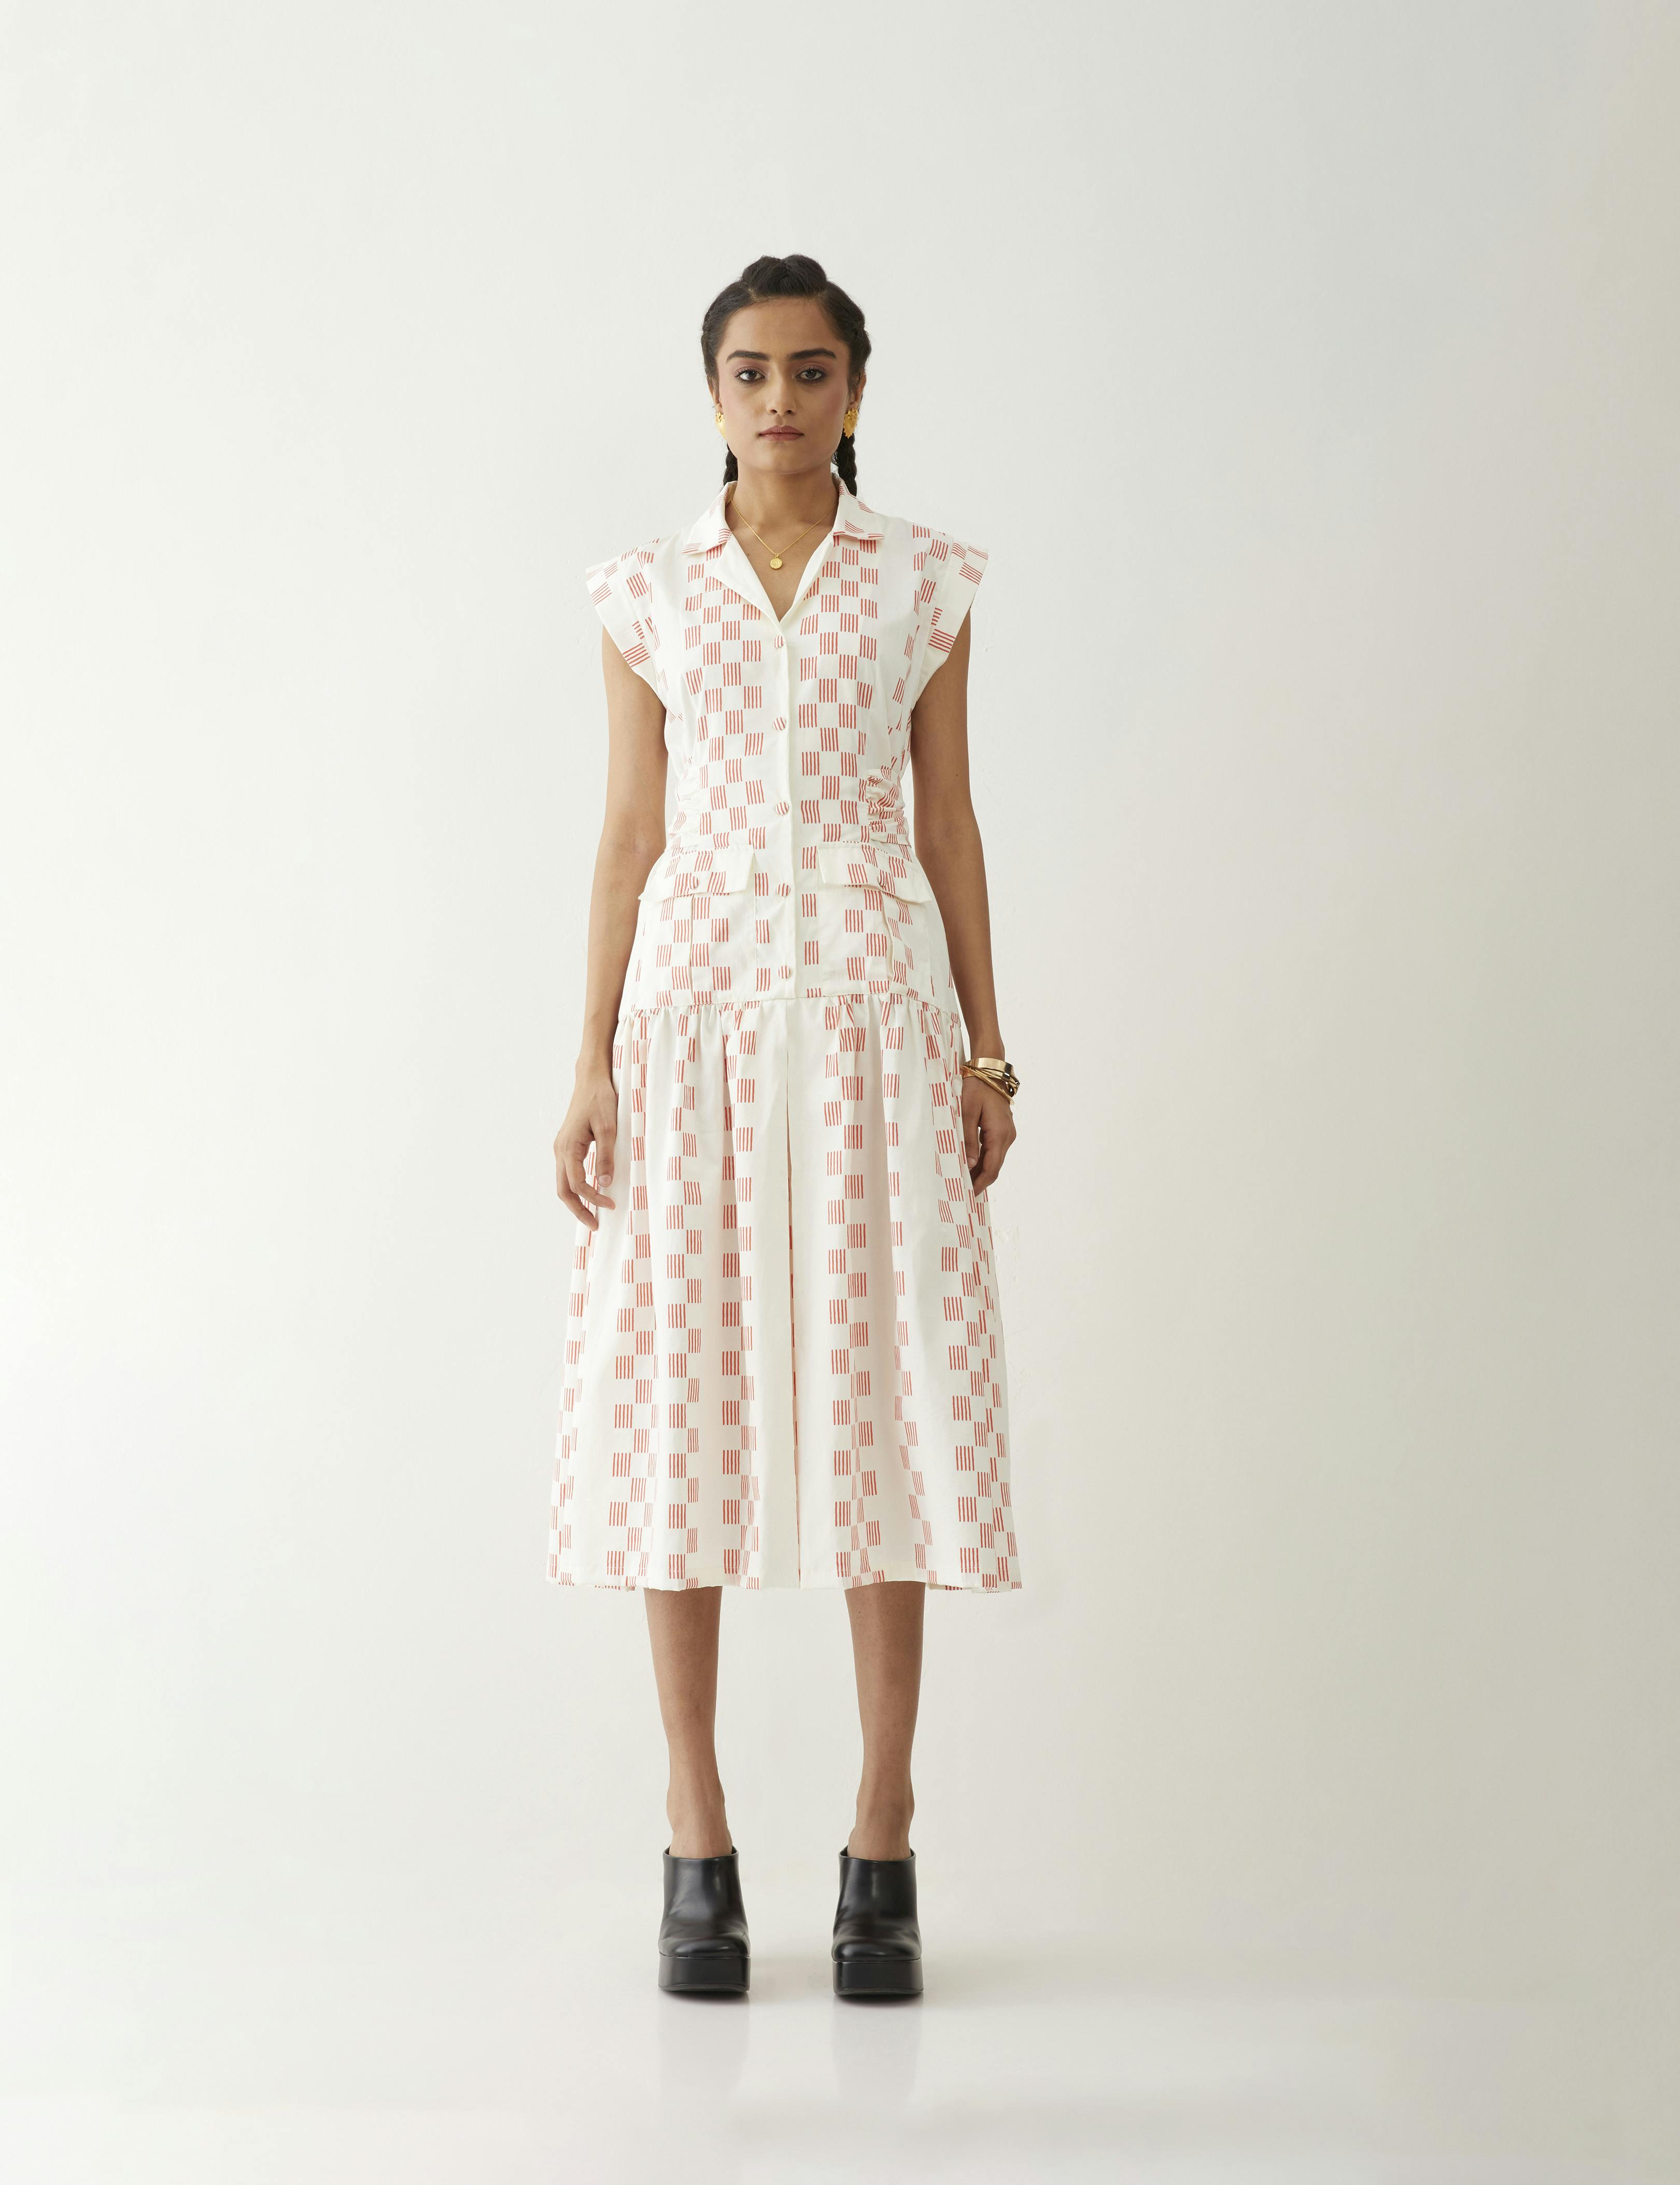 Agnes Dress - Off White, a product by Son of a Noble